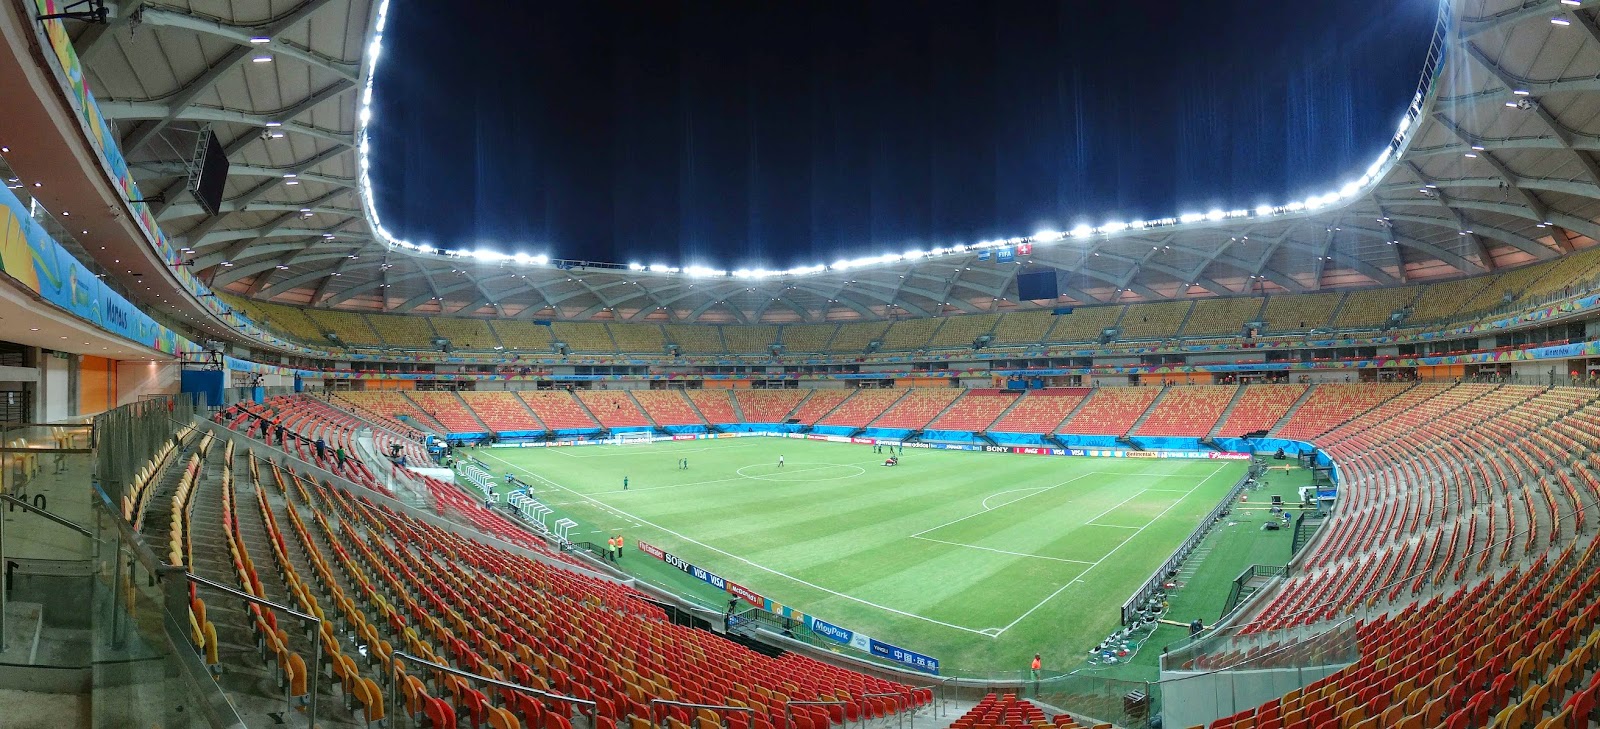 FIFA World Cup Stadiums Feature World-Class Audio with HARMAN Professional